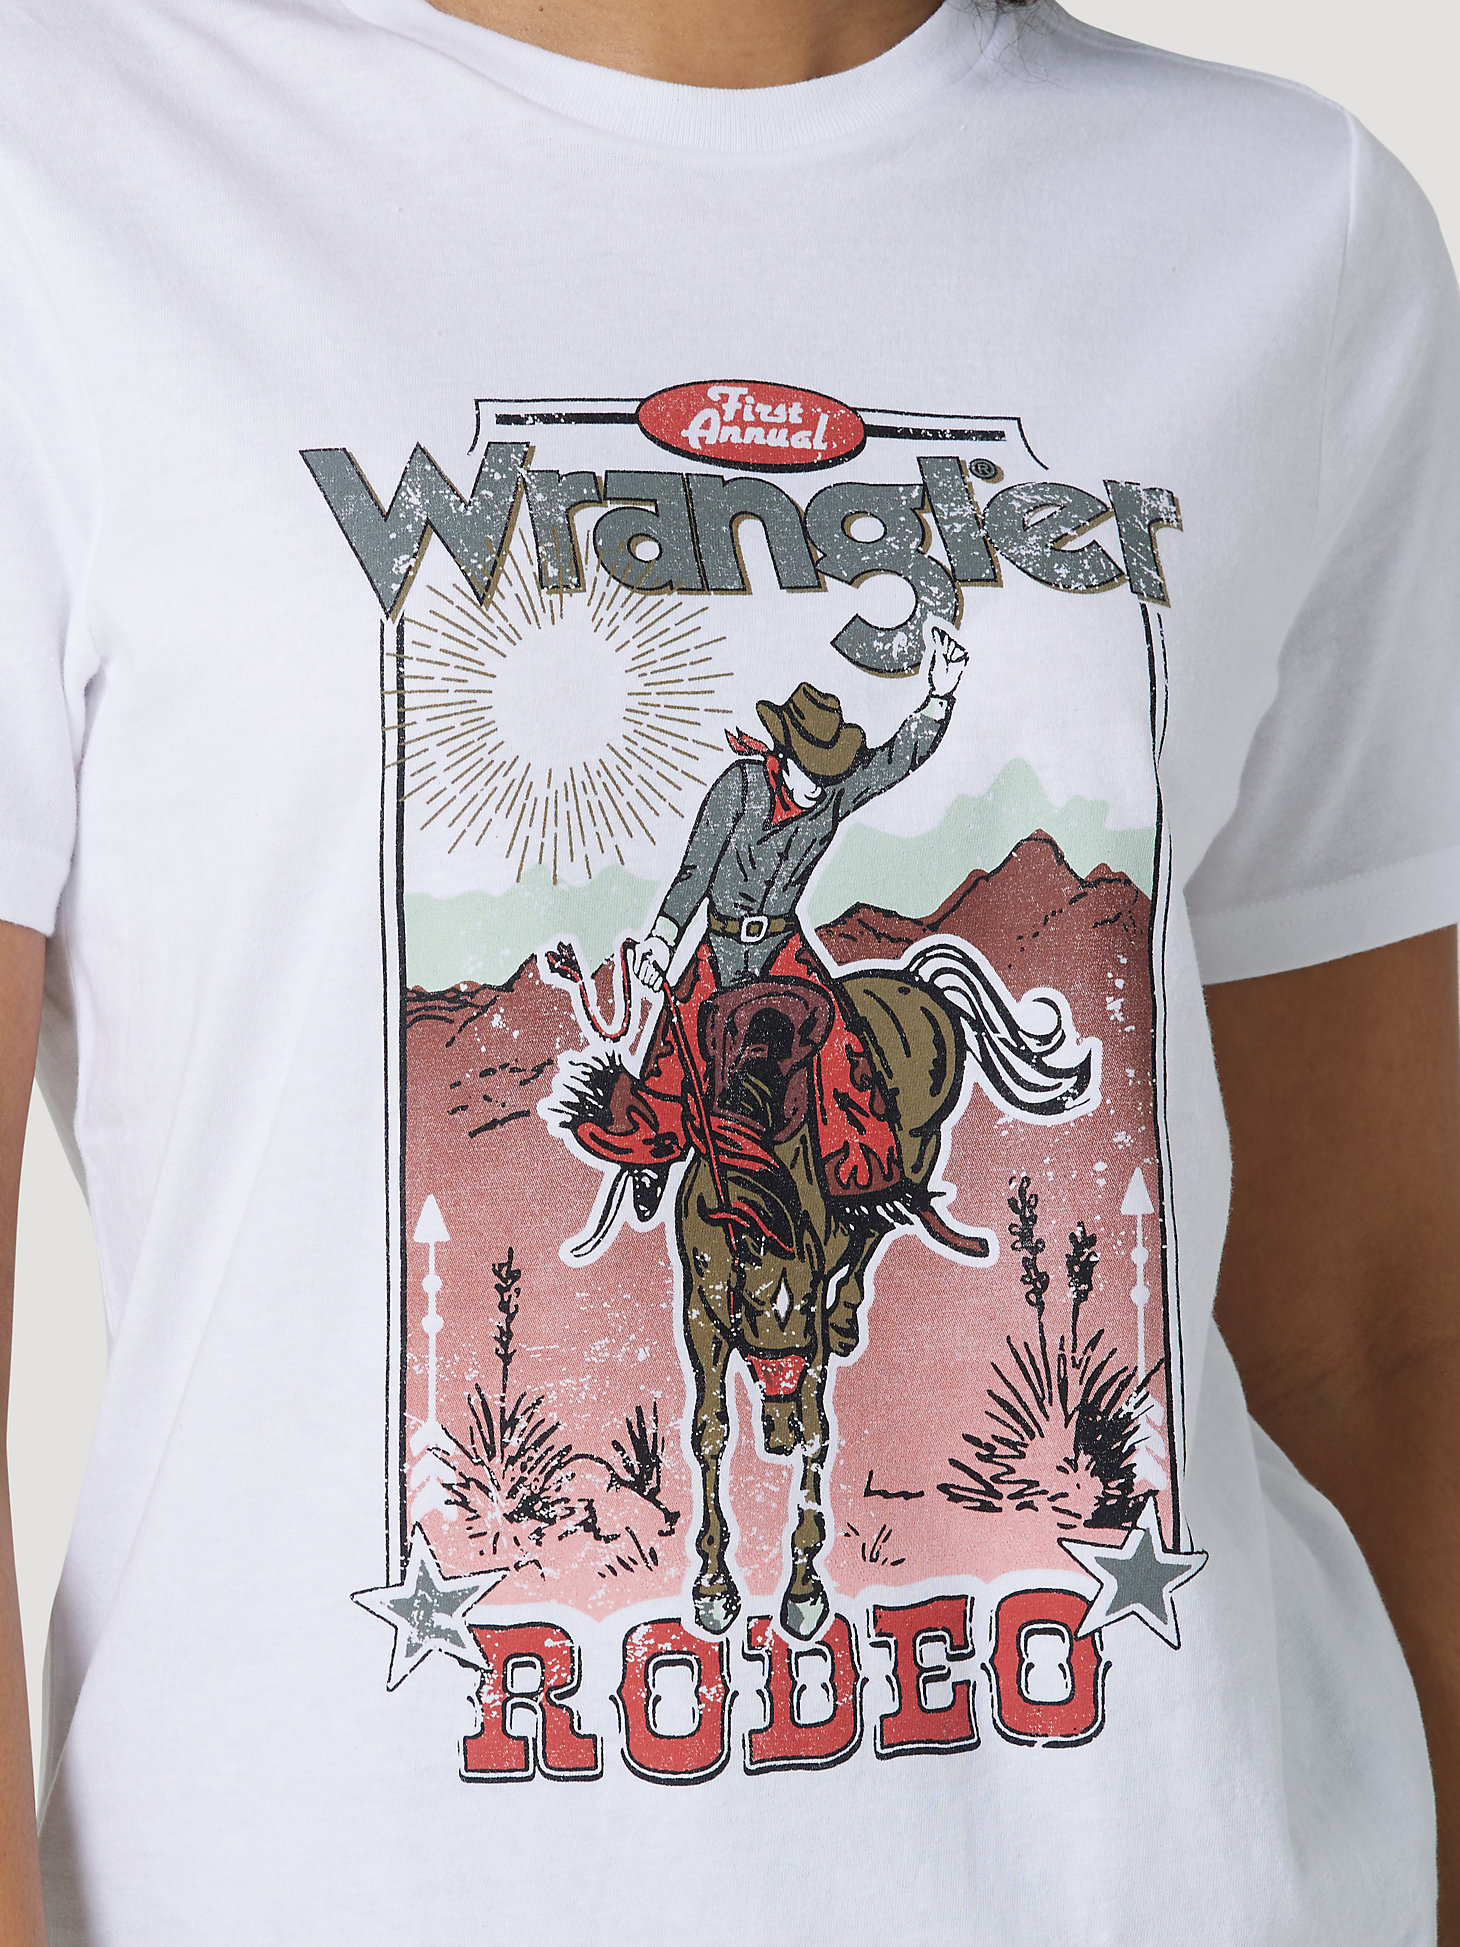 Women's Rodeo Poster Tee in Bright White alternative view 1